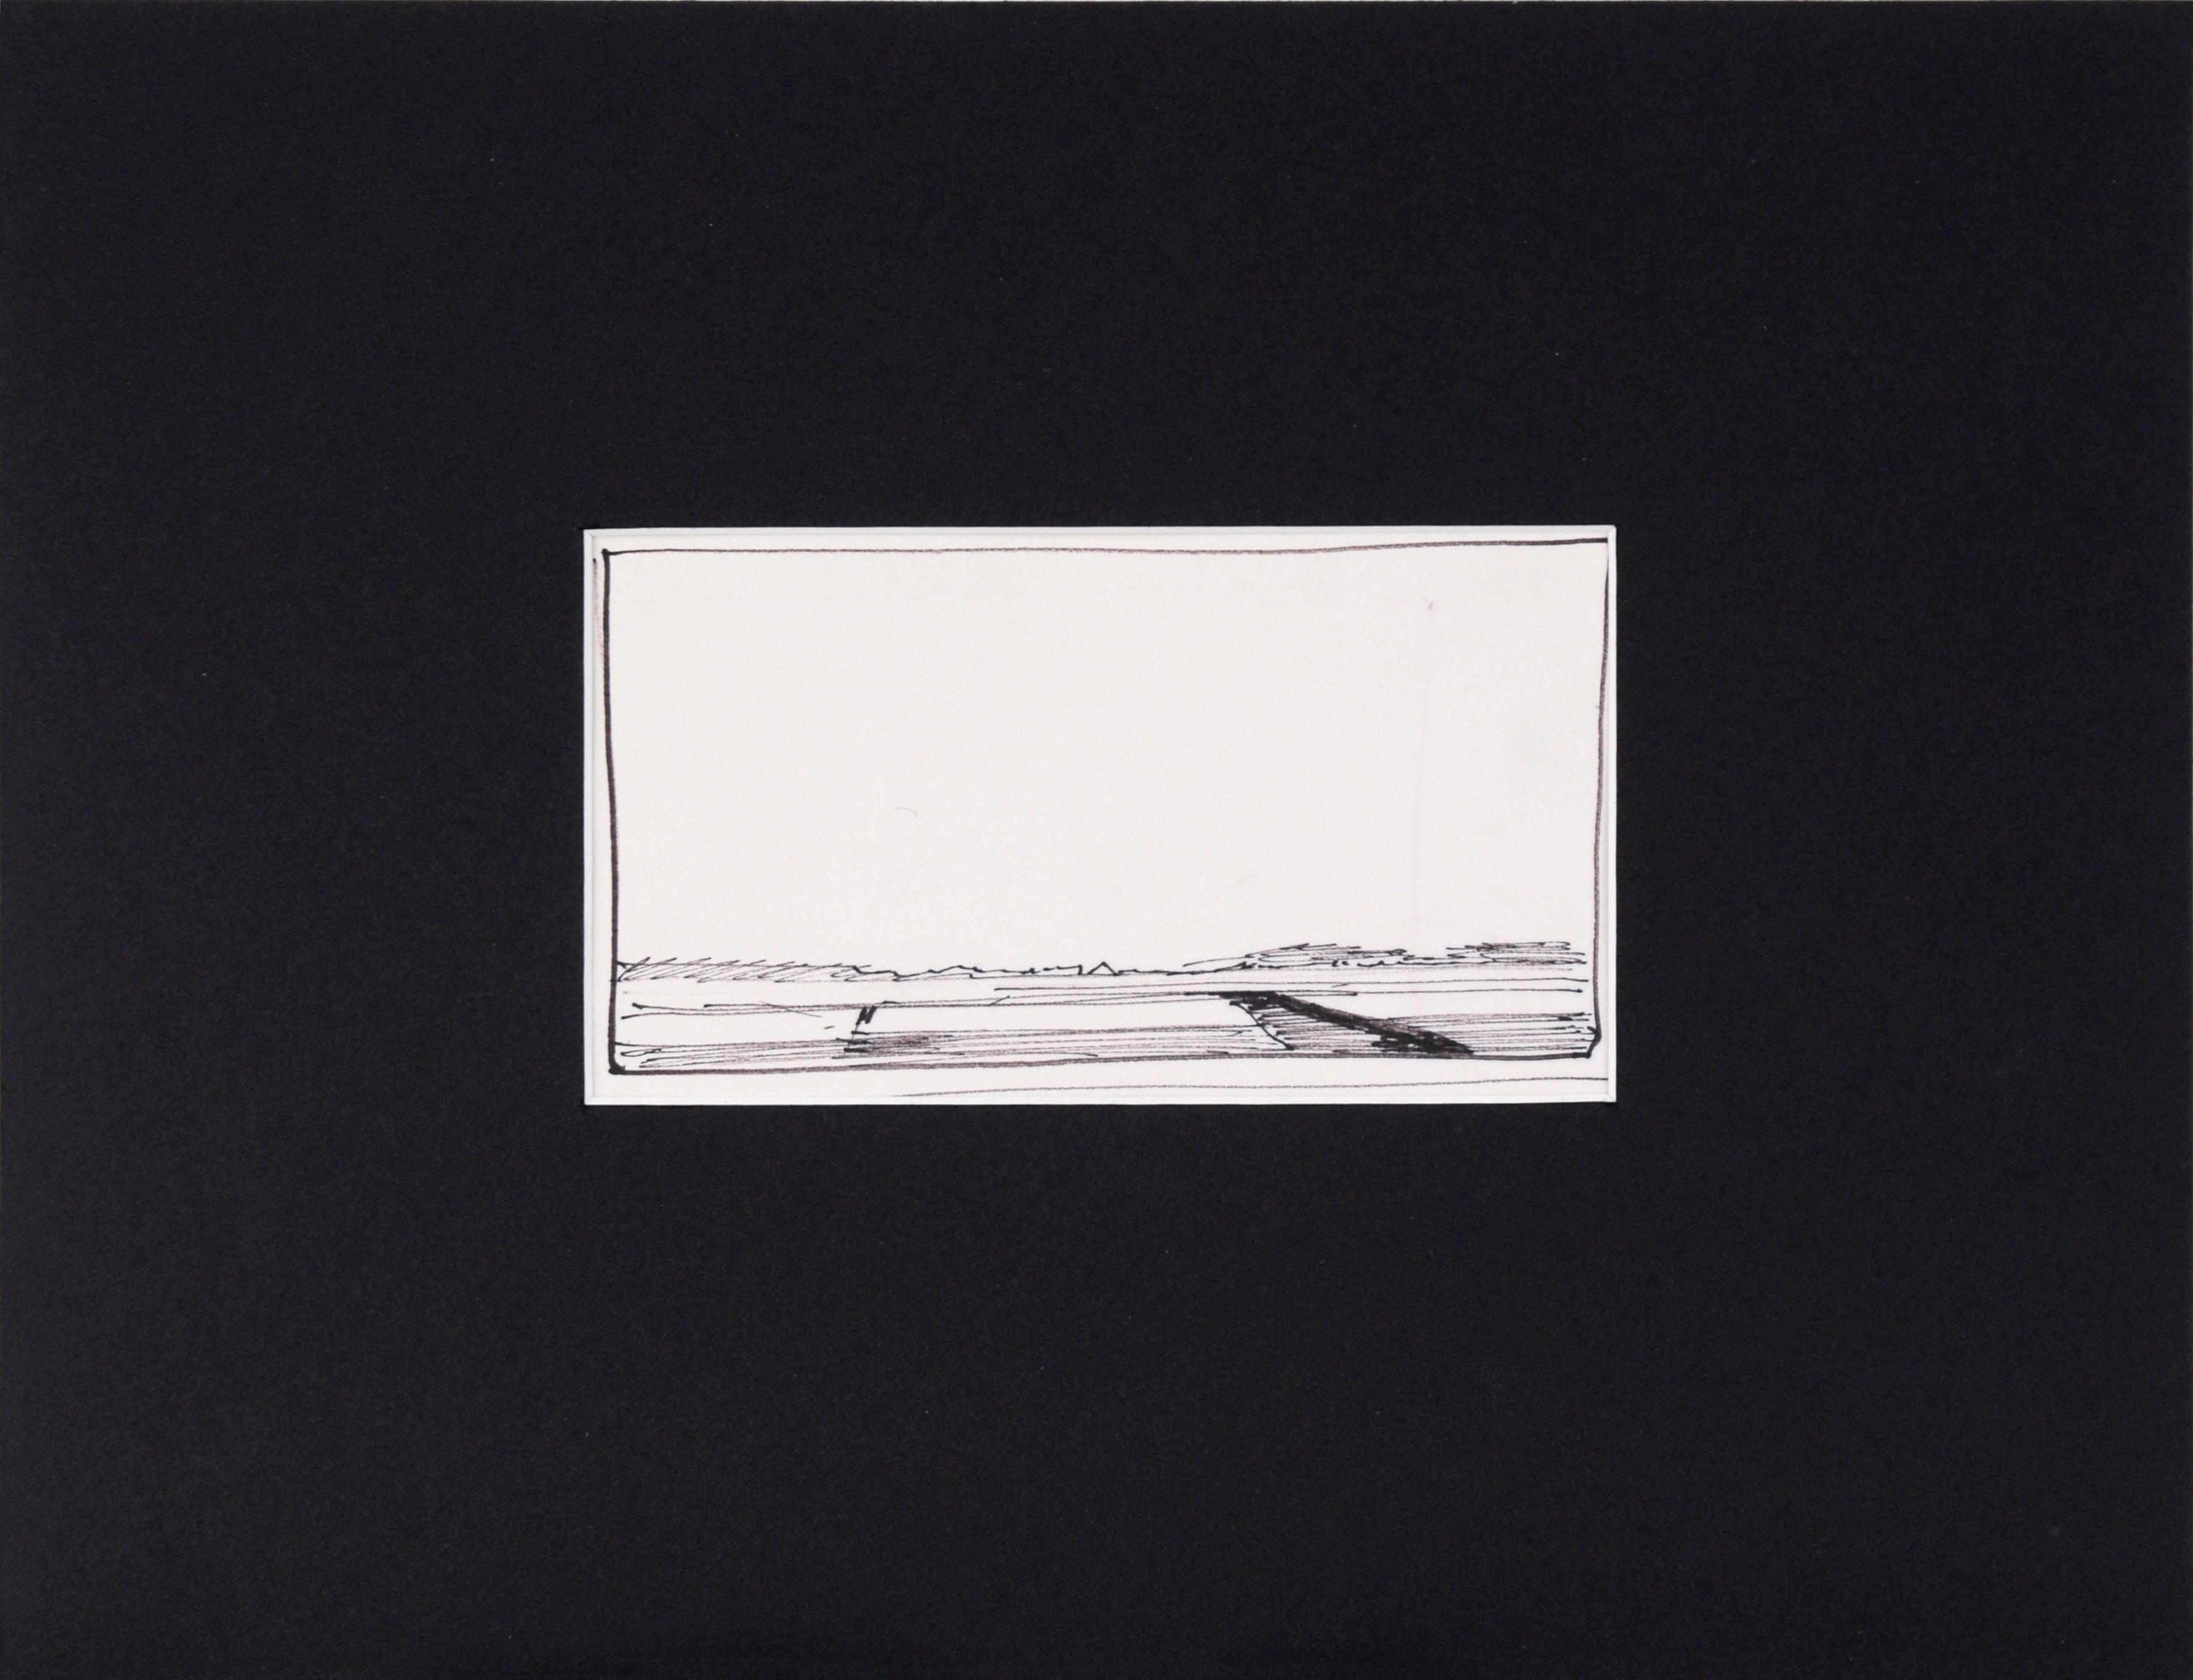 Laurence Sisson Landscape Art - A Cloudless Sky - Line Drawing Landscape in Ink on Paper